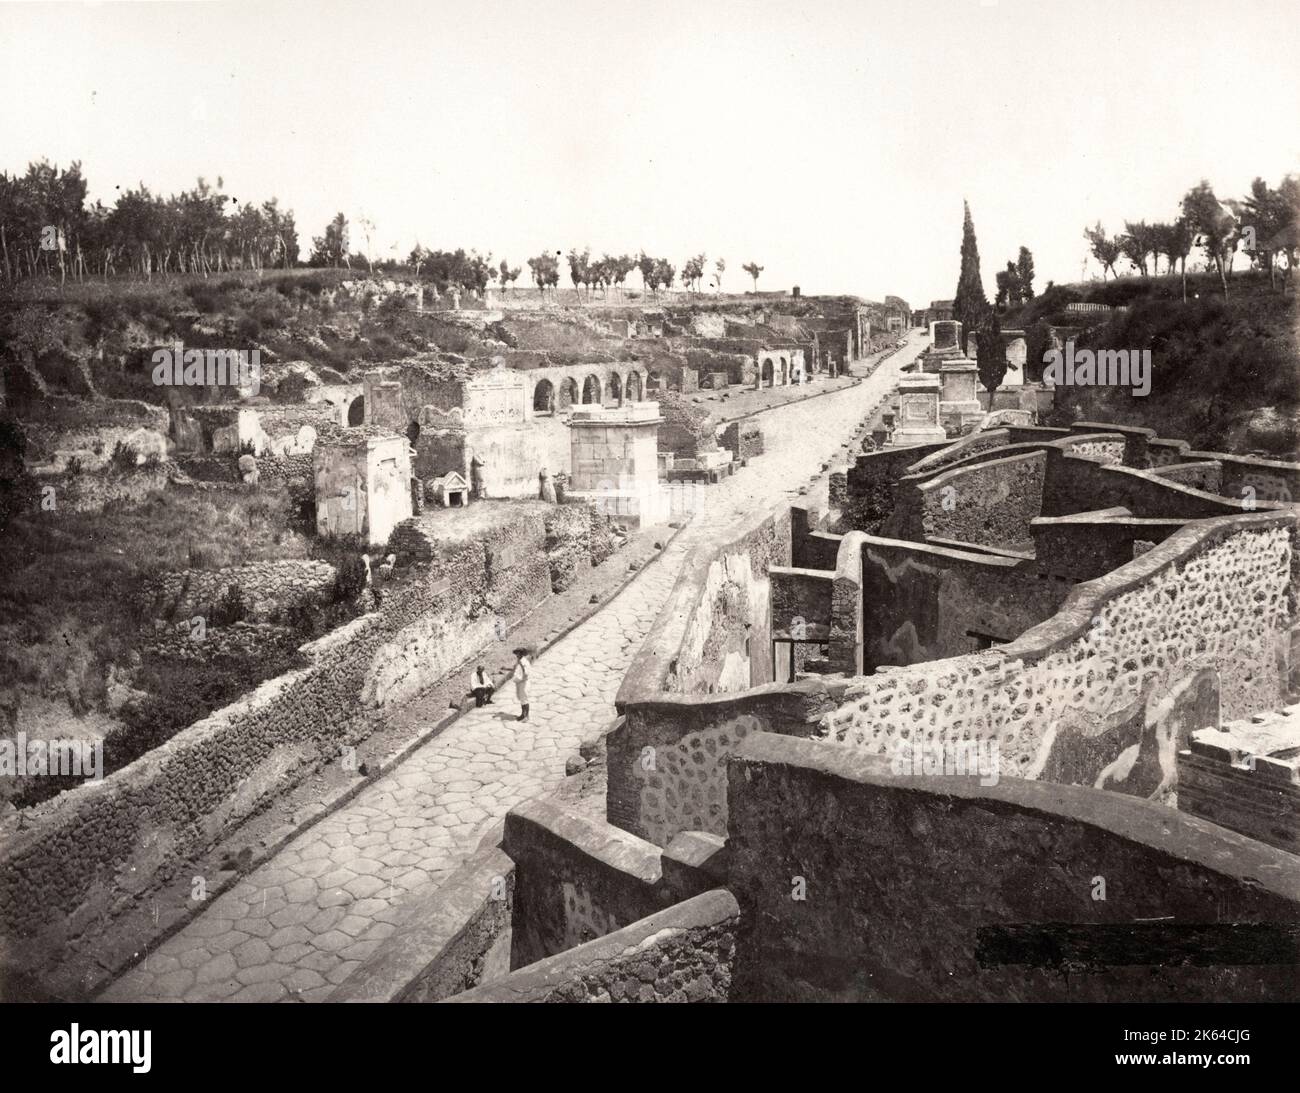 Vintage 19th century photograph - Street of Tombs, Pompeii, Italy. The Street of Tombs ran from the Herculaneum Gate on the road leading towards Herculaneum. It was forbidden to bury bodies inside the walls of Pompeii and so this street, which is outside of the city, has over thirty tombs in it. It was a busy road for travellers and so also had shops along it. Stock Photo